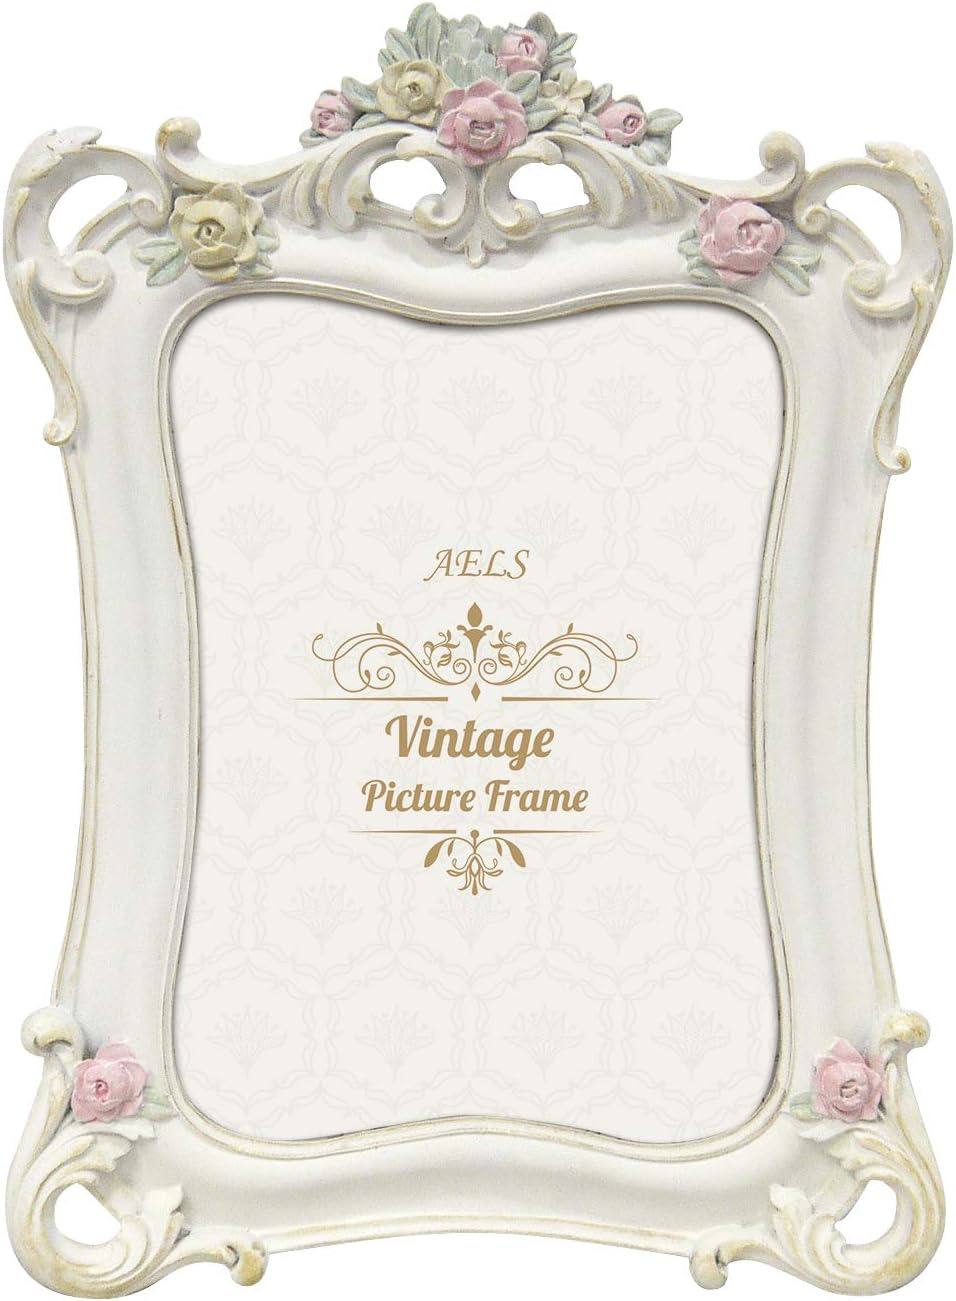 5x7 Inch Vintage Picture Frame Elegant Antique Photo Frames with Glass Front ...